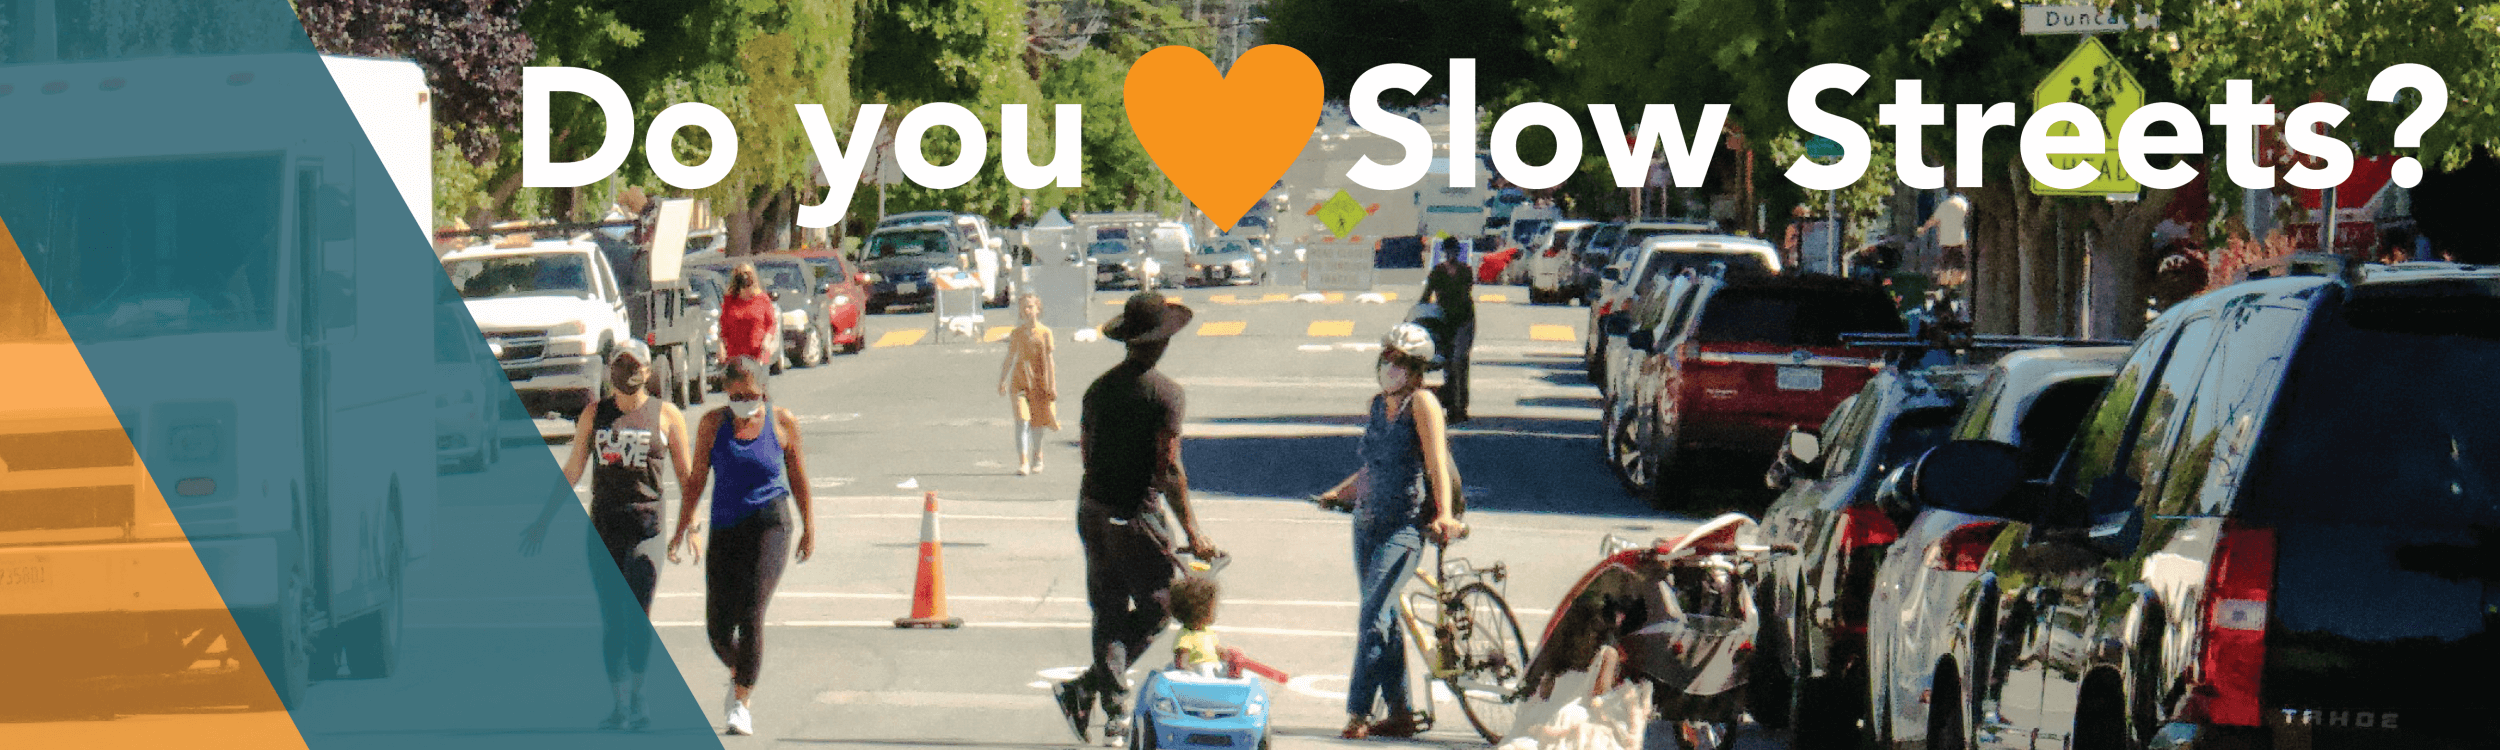 Take Action in Support of Slow Streets